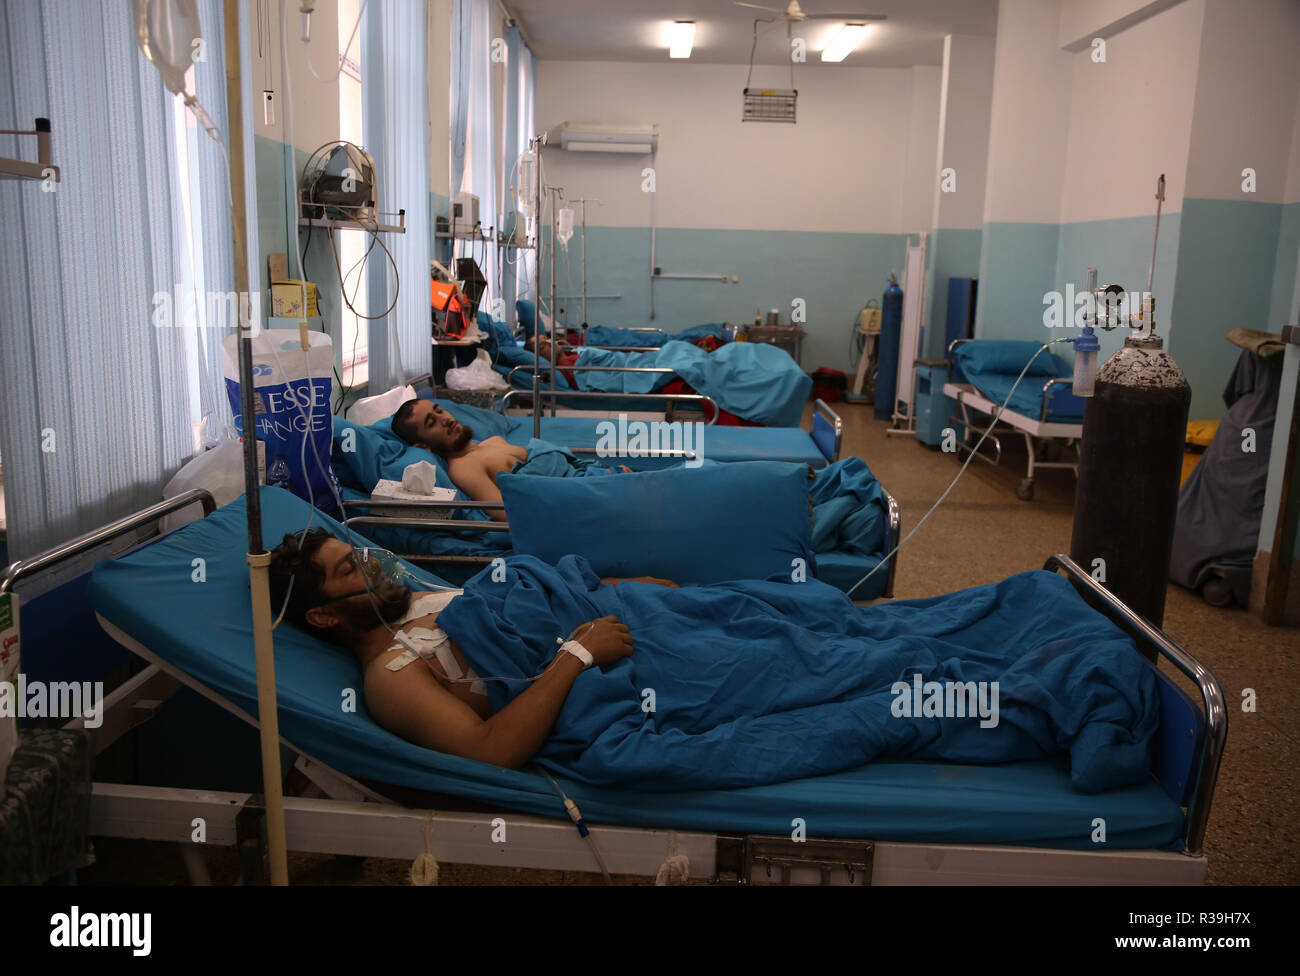 Kabul, Afghanistan. 22nd Nov, 2018. Injured men receive medical treatment at Wazir Akbar Khan hospital in Kabul, Afghanistan, Nov. 22, 2018. On Tuesday evening, a suicide bomber detonated his explosive belt at a wedding hall where scores of religious scholars and ordinary people were celebrating the birthday of Muslims Prophet Mohammad, killing over 60 and injuring more than 90 others, according to latest figures by the country's Ministry of Public Health. Credit: Rahmat Alizadah/Xinhua/Alamy Live News Stock Photo